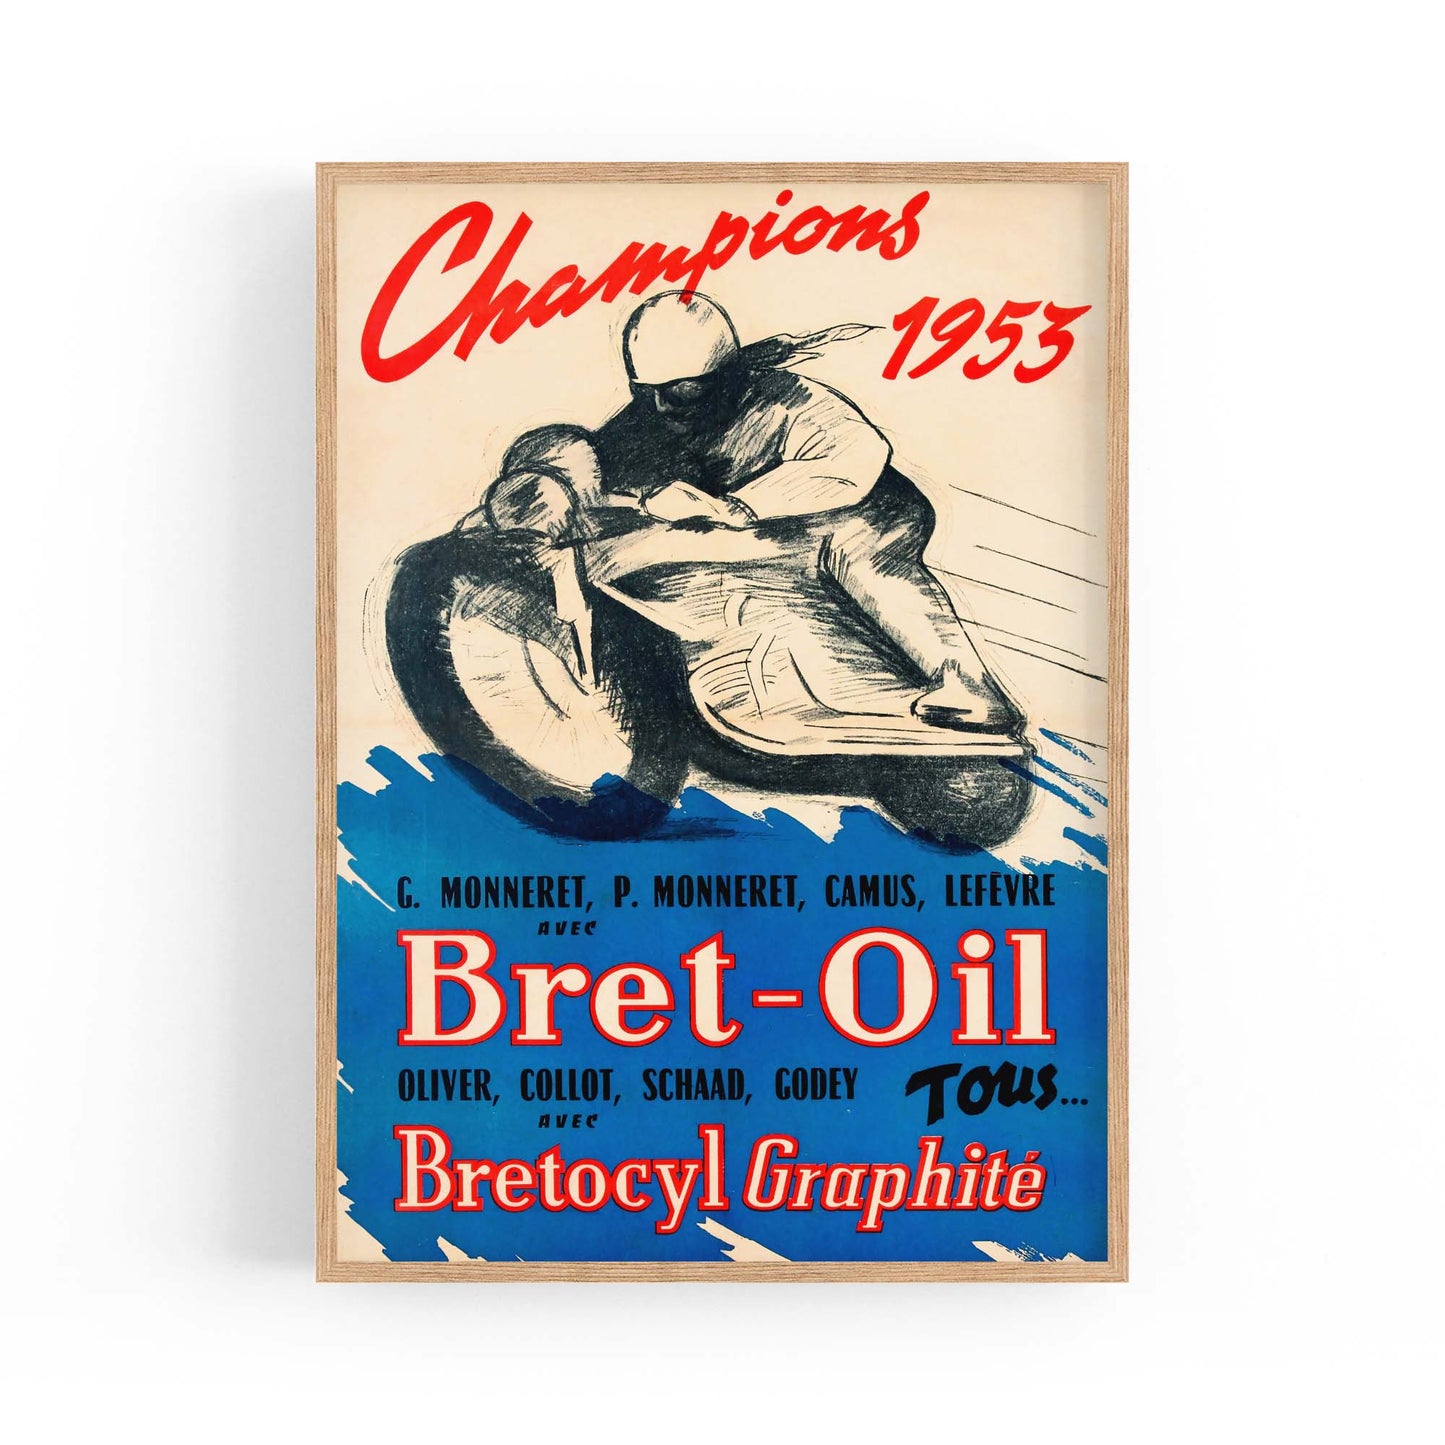 French Bret-Oil Vintage Advert Garage Wall Art - The Affordable Art Company